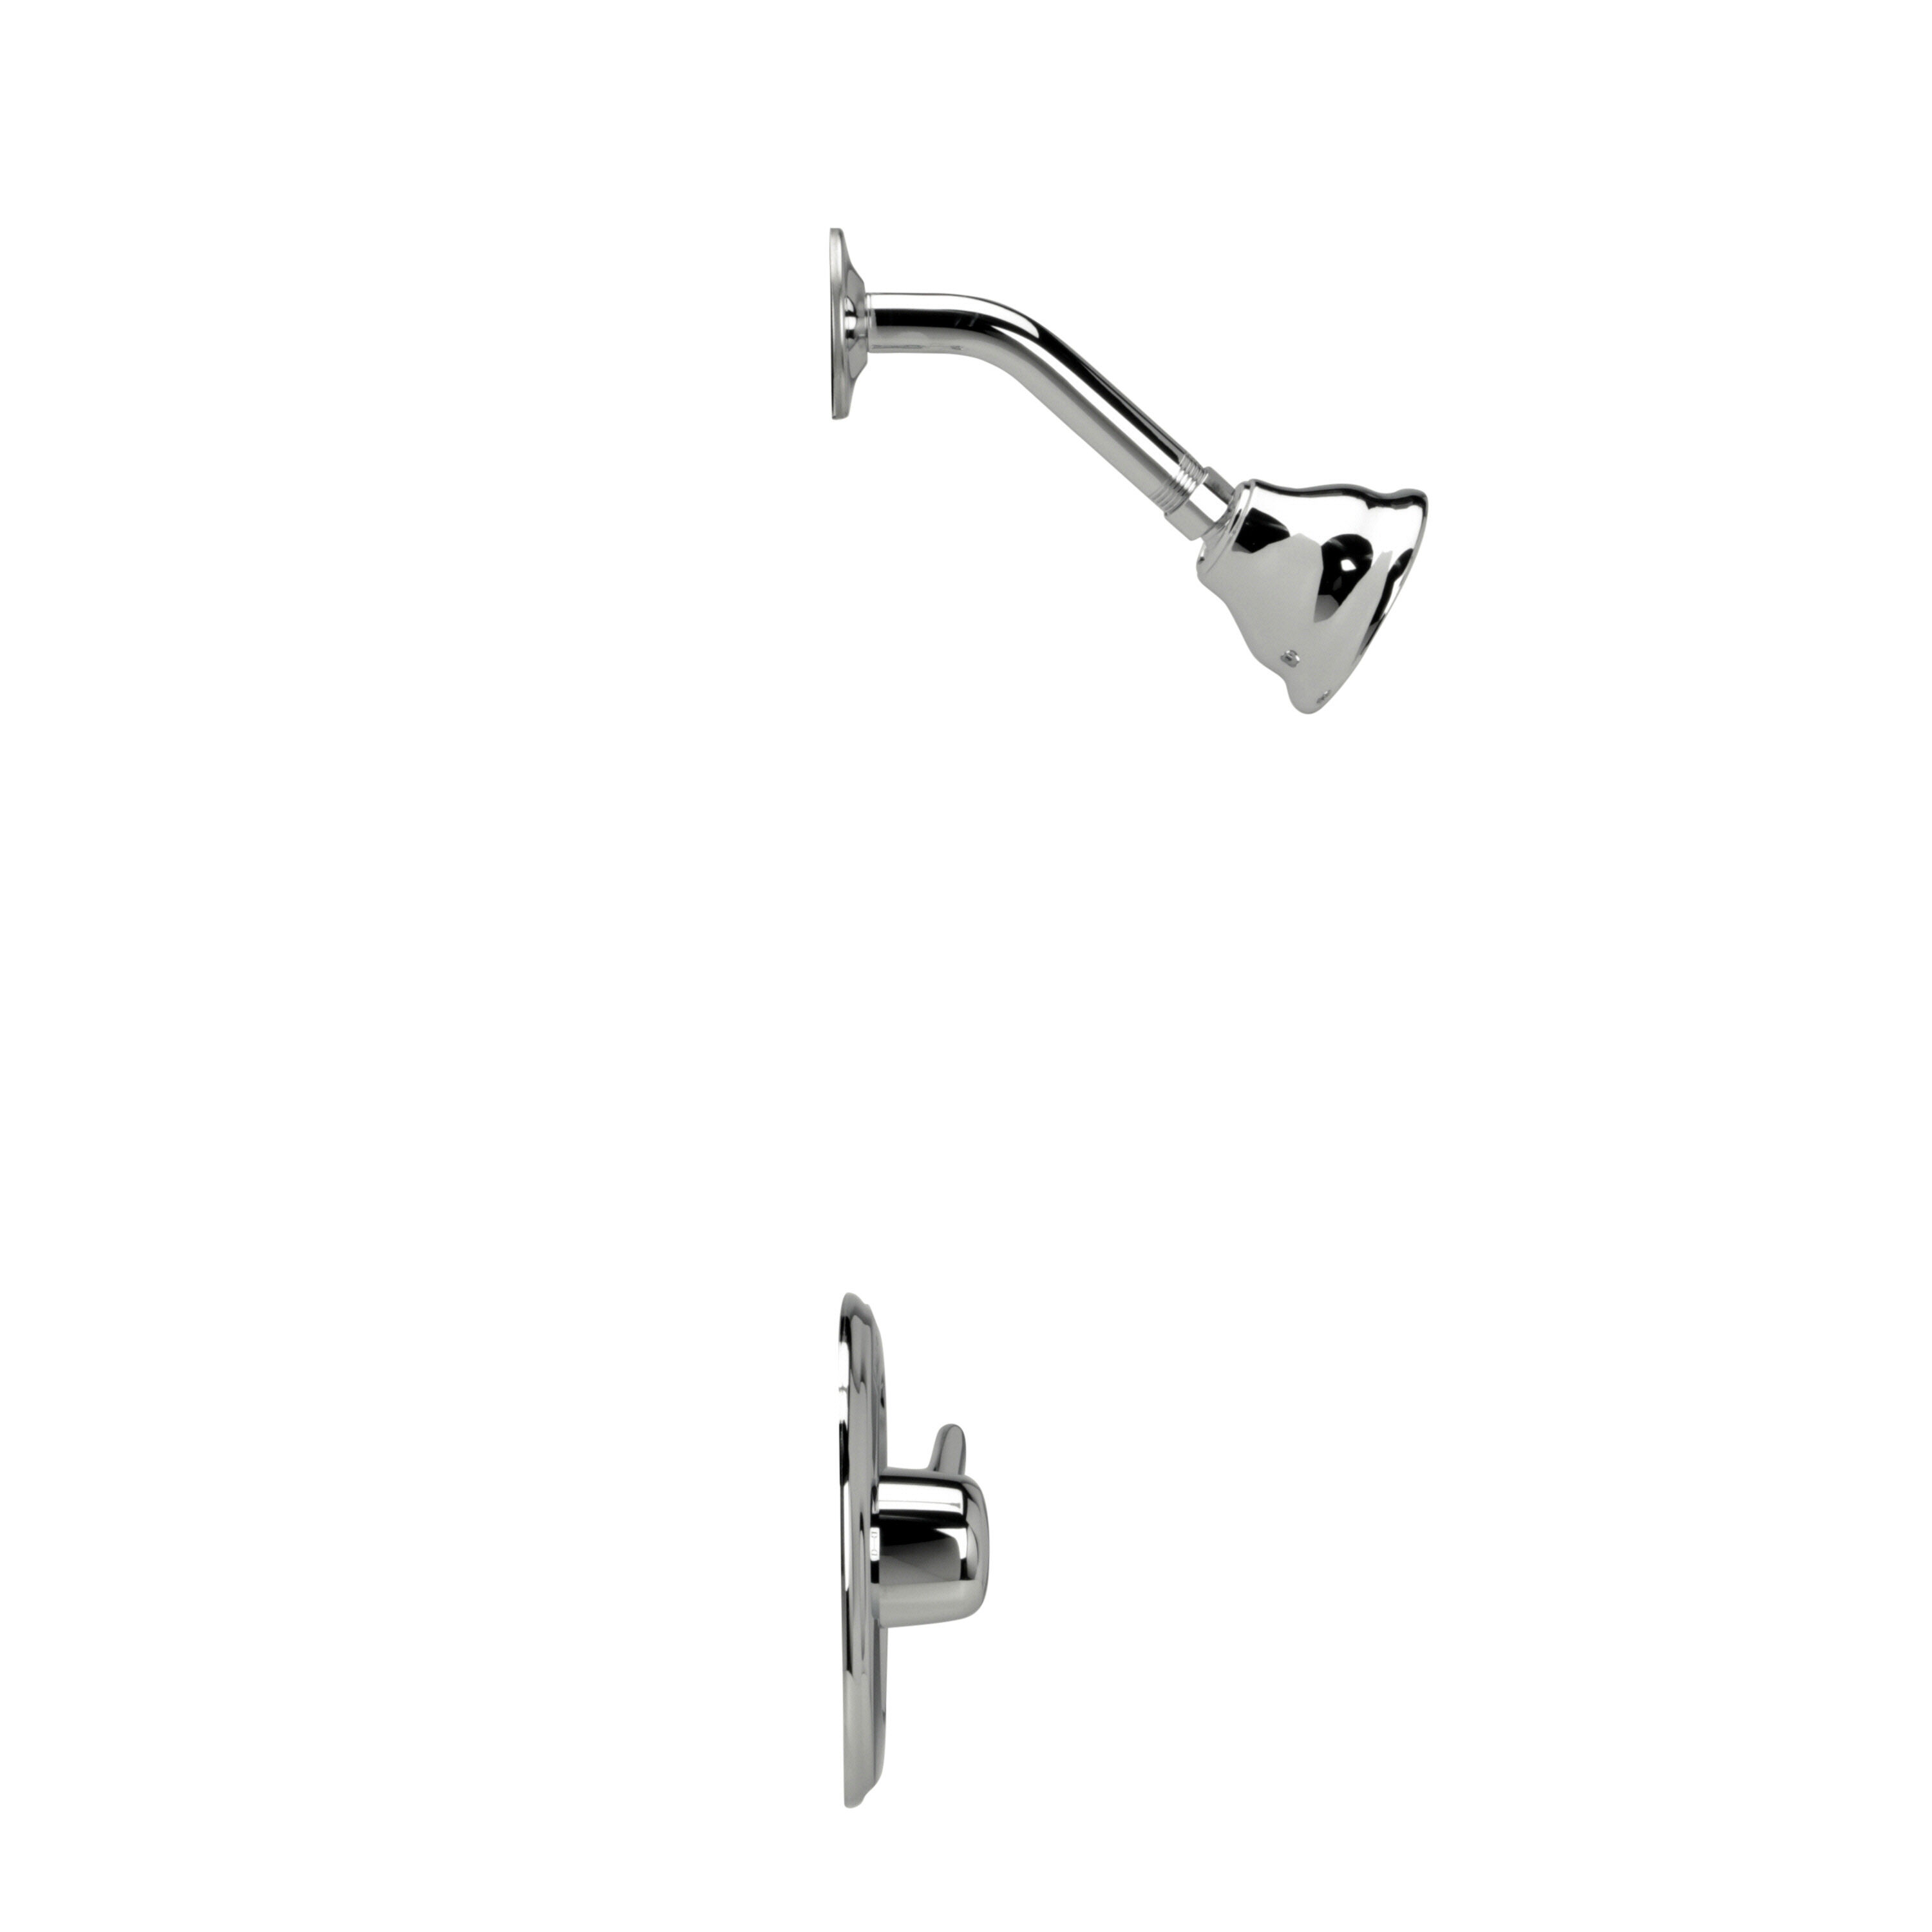 Monitor® 14 Series Shower Trim in Chrome T14238 | Delta Faucet